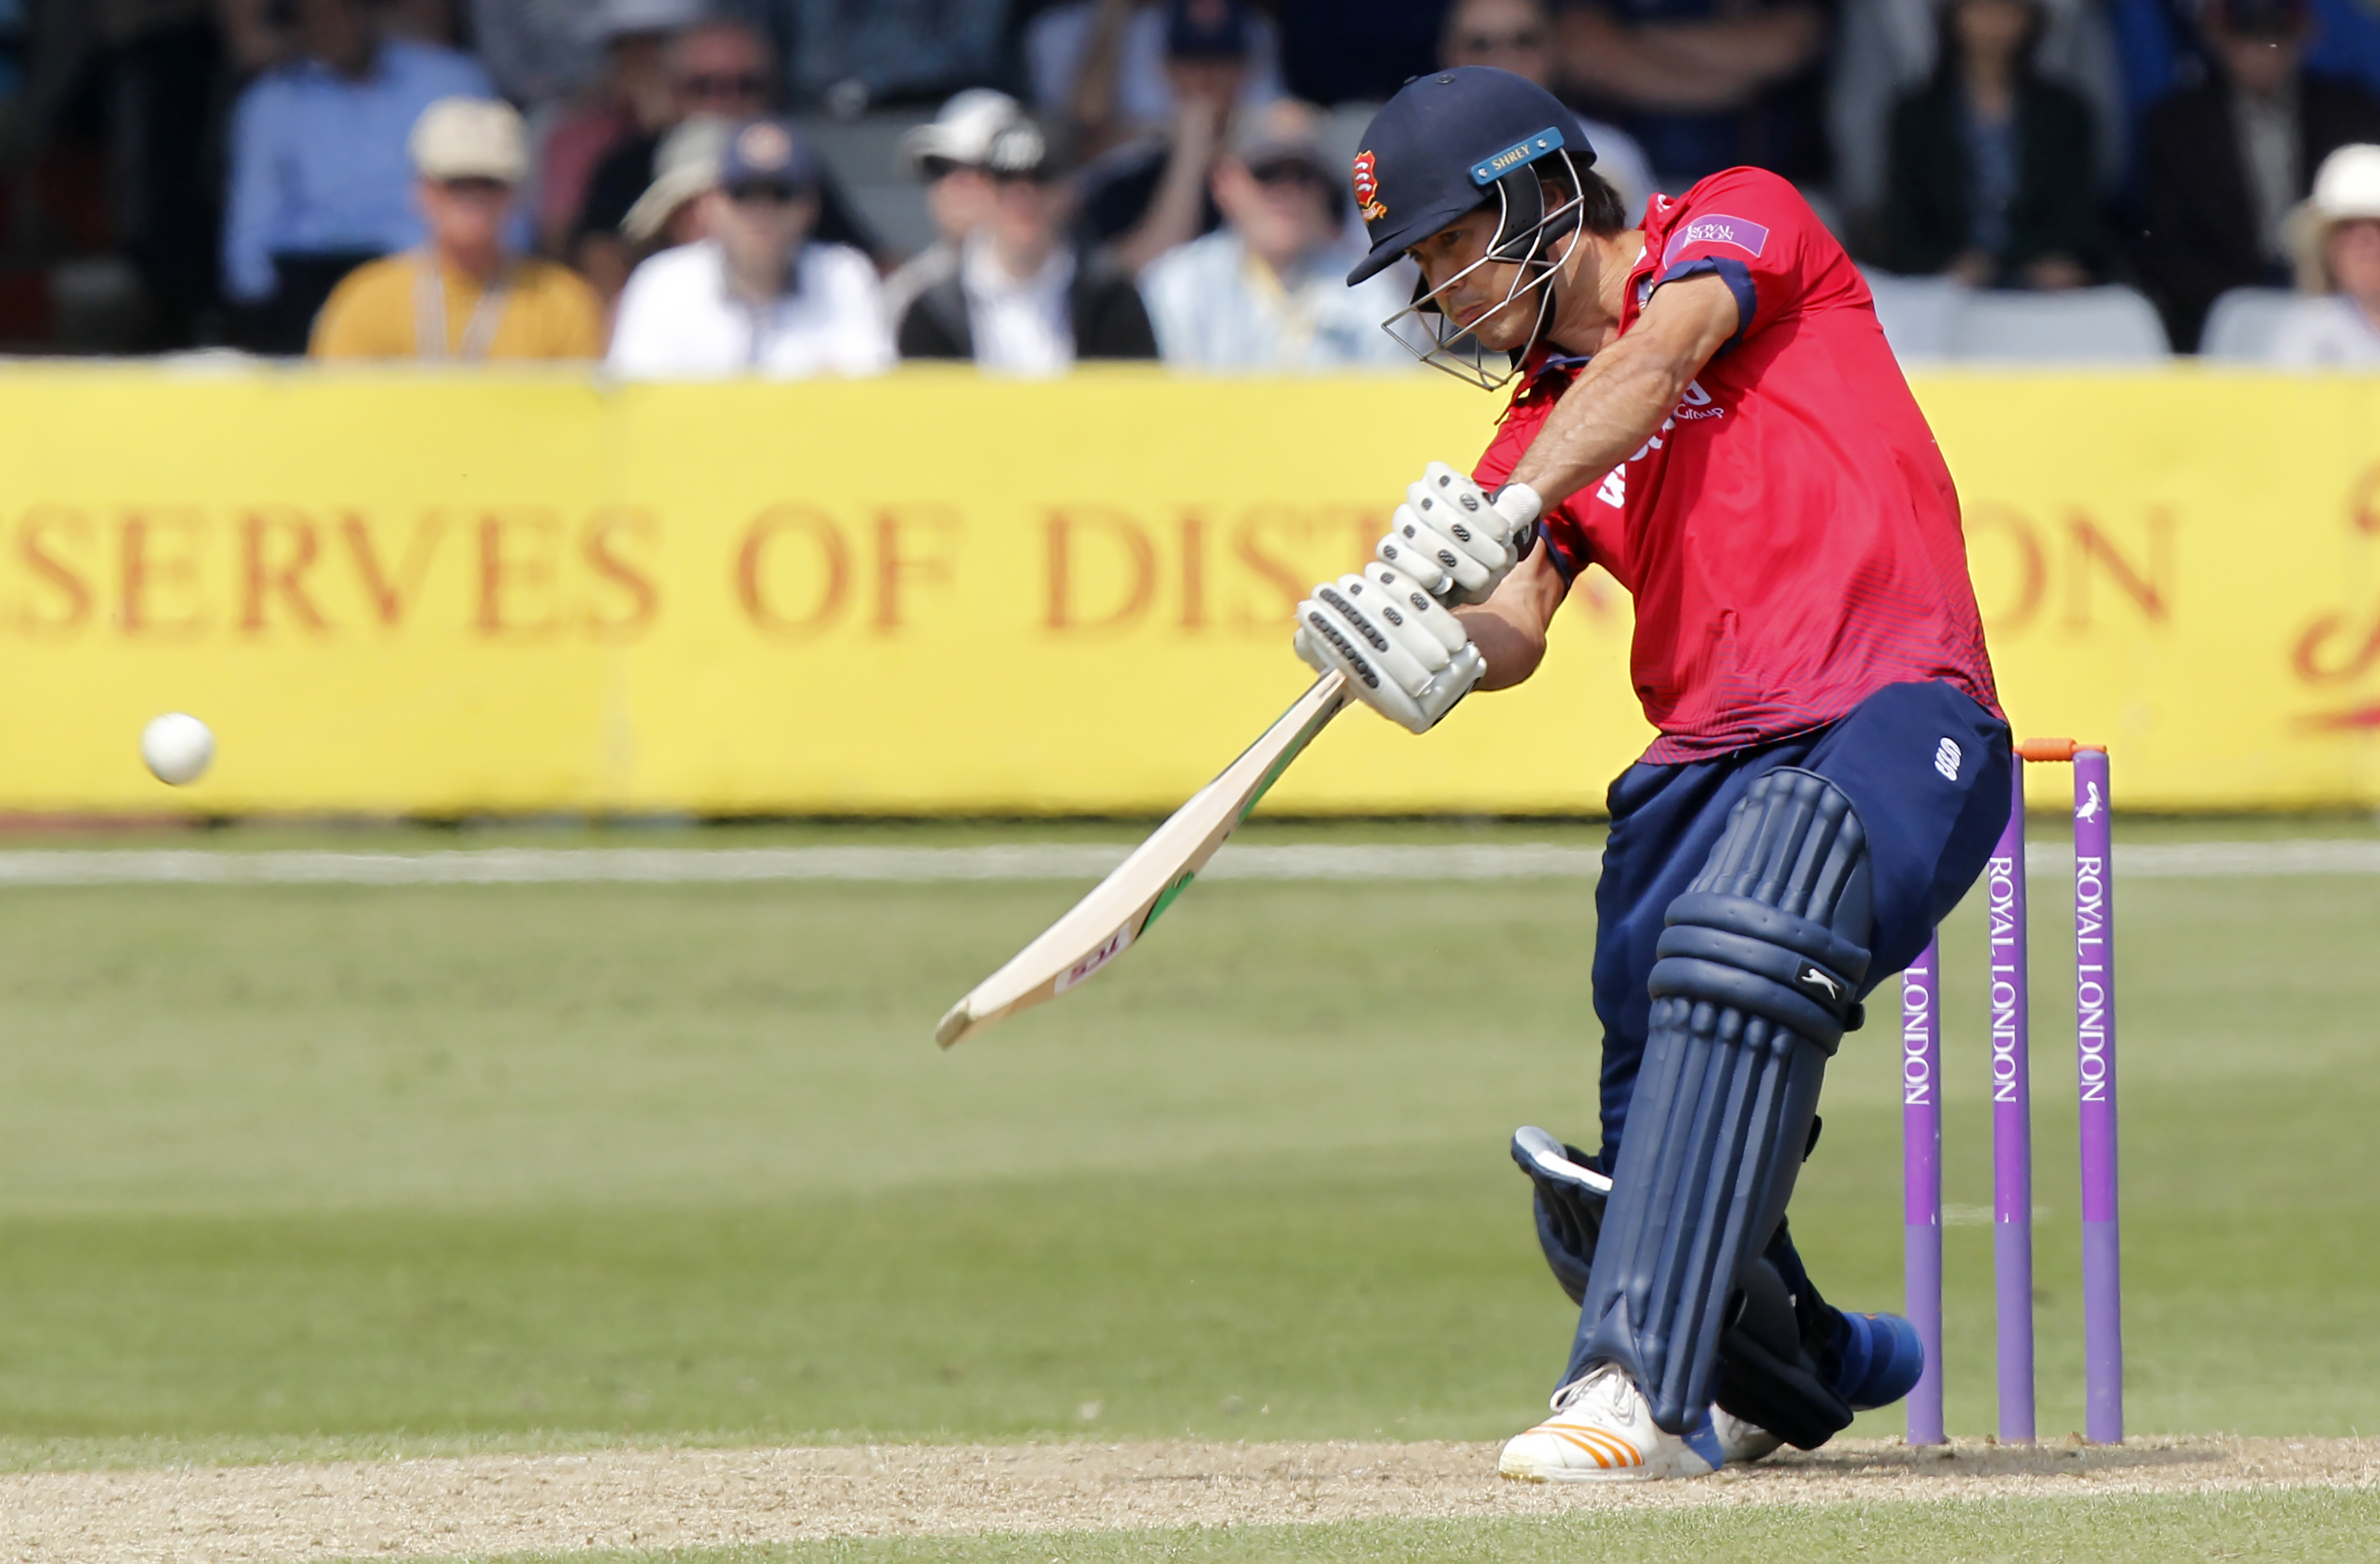 Essex Eagles v Surrey – Royal London One Day Cup – The Cloudfm County Ground